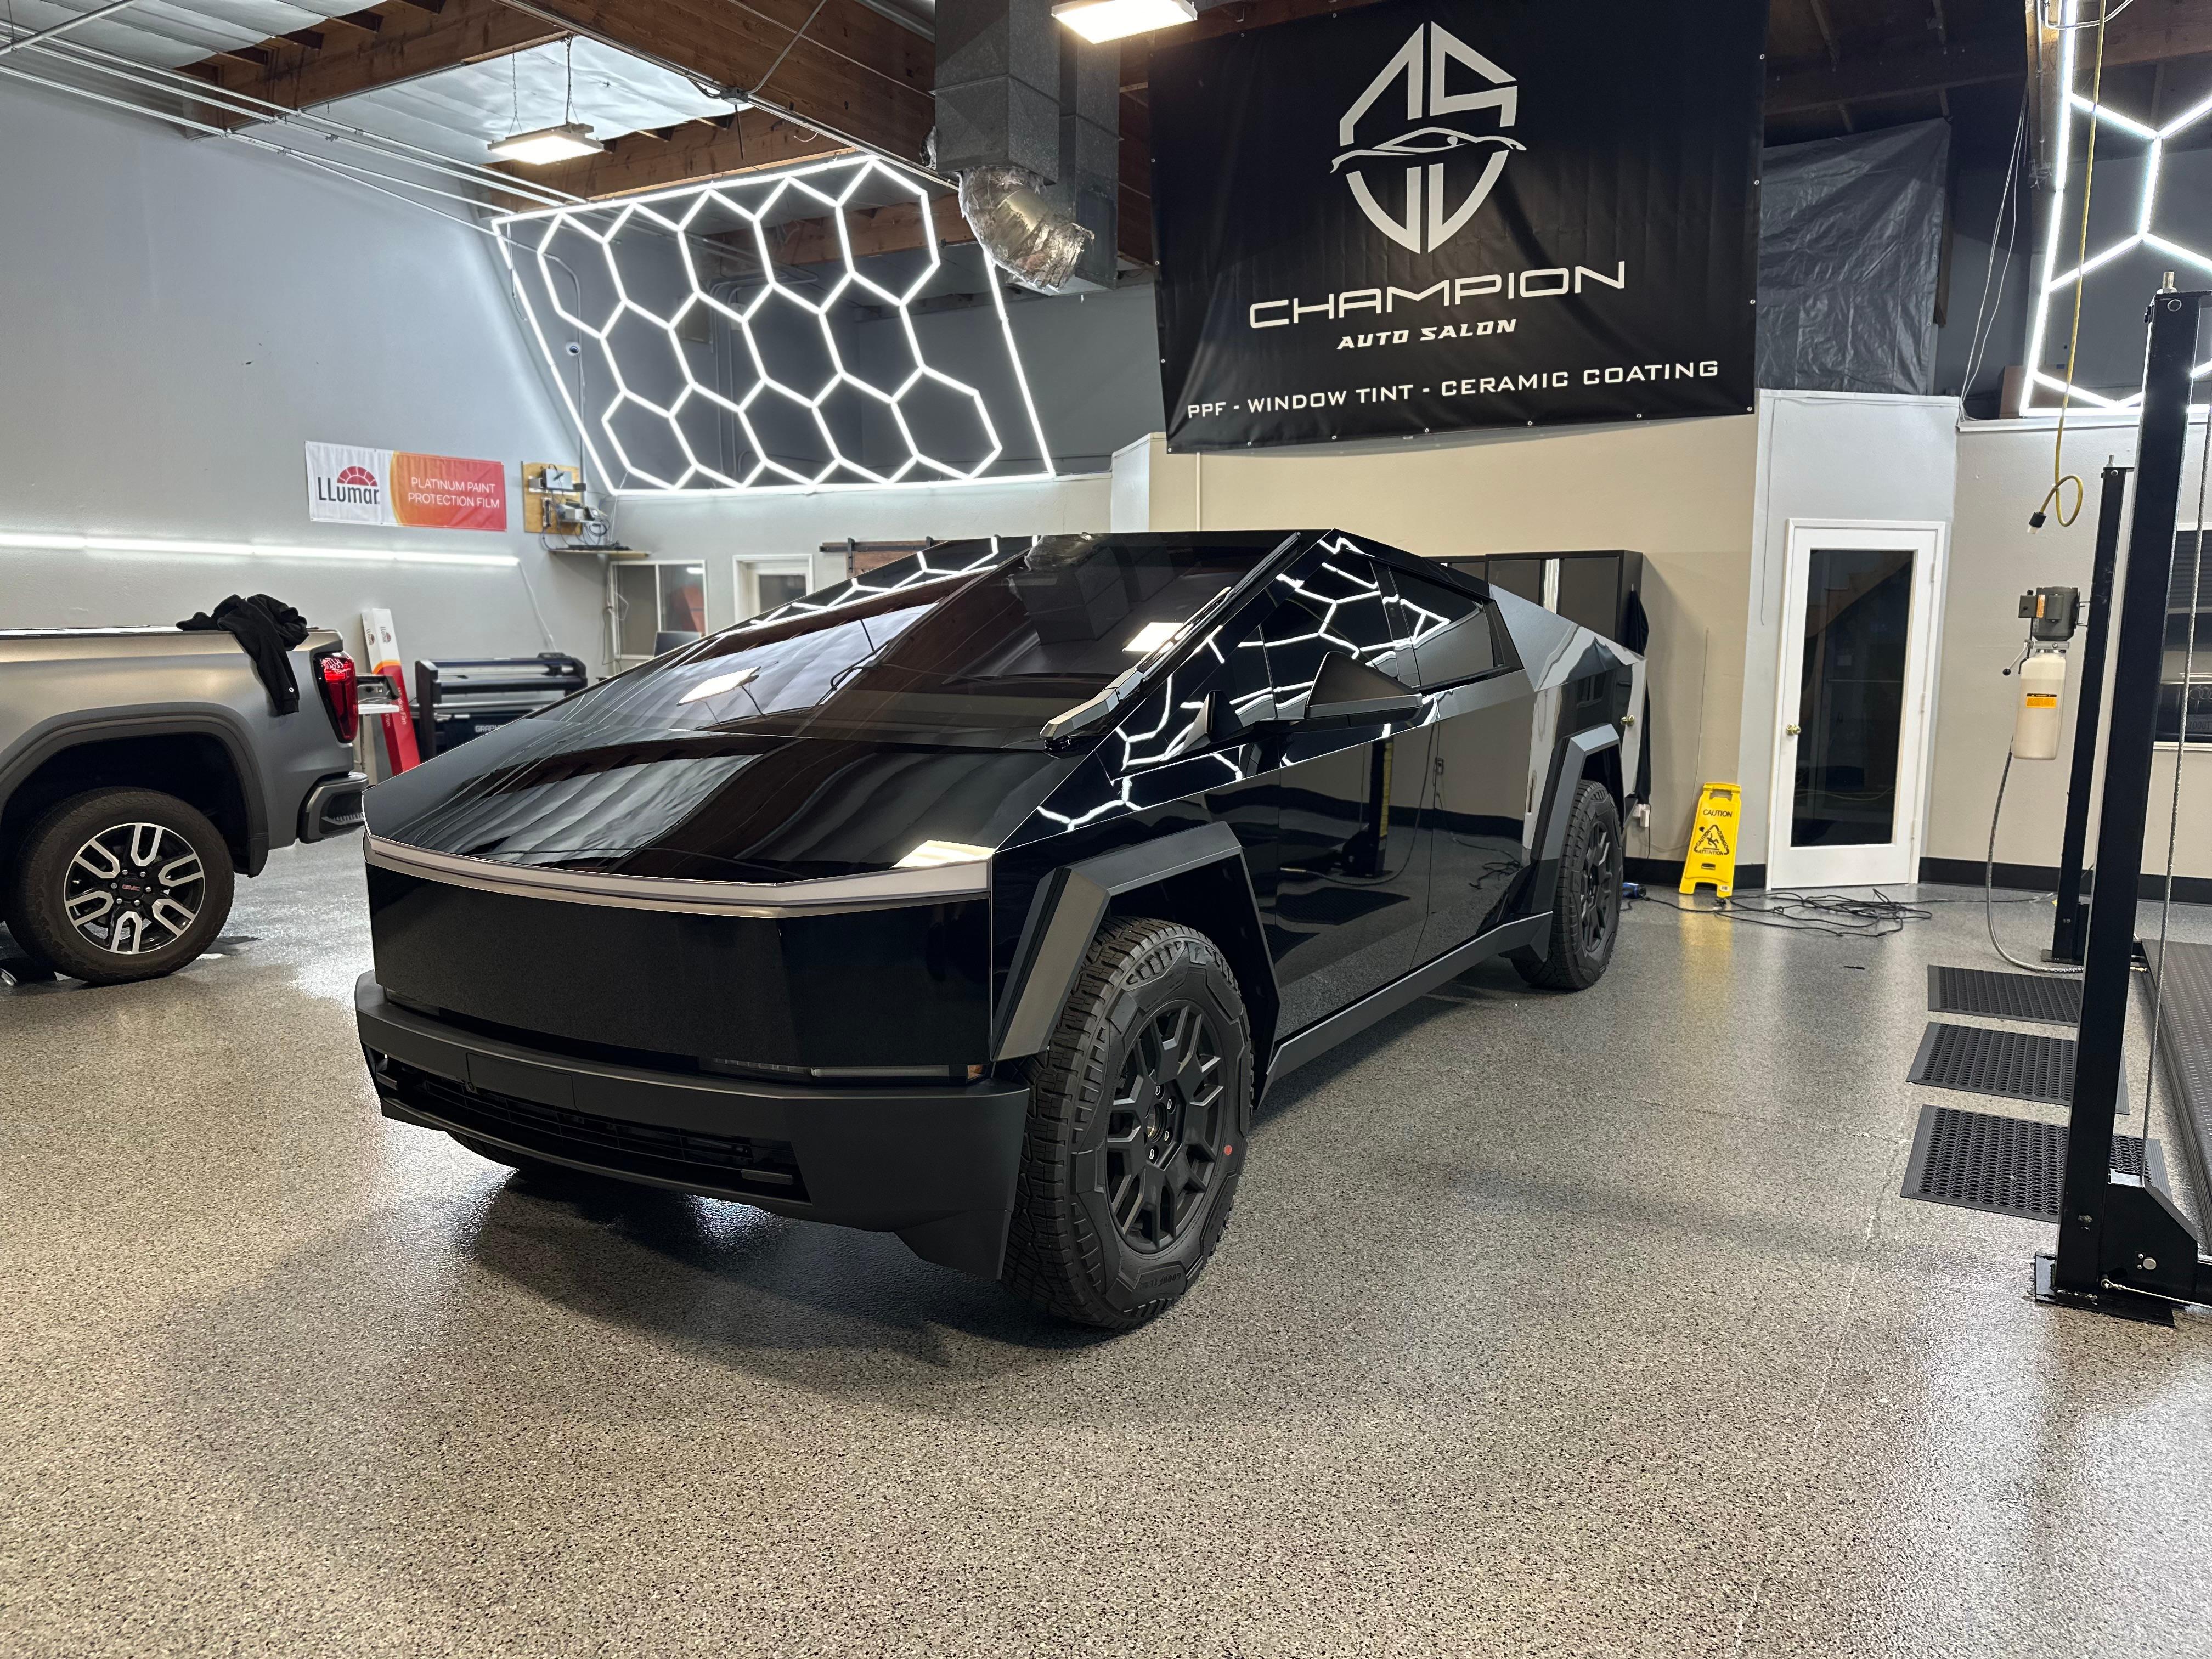 Check out the PPF job we just finished on this Tesla Cybertruck!